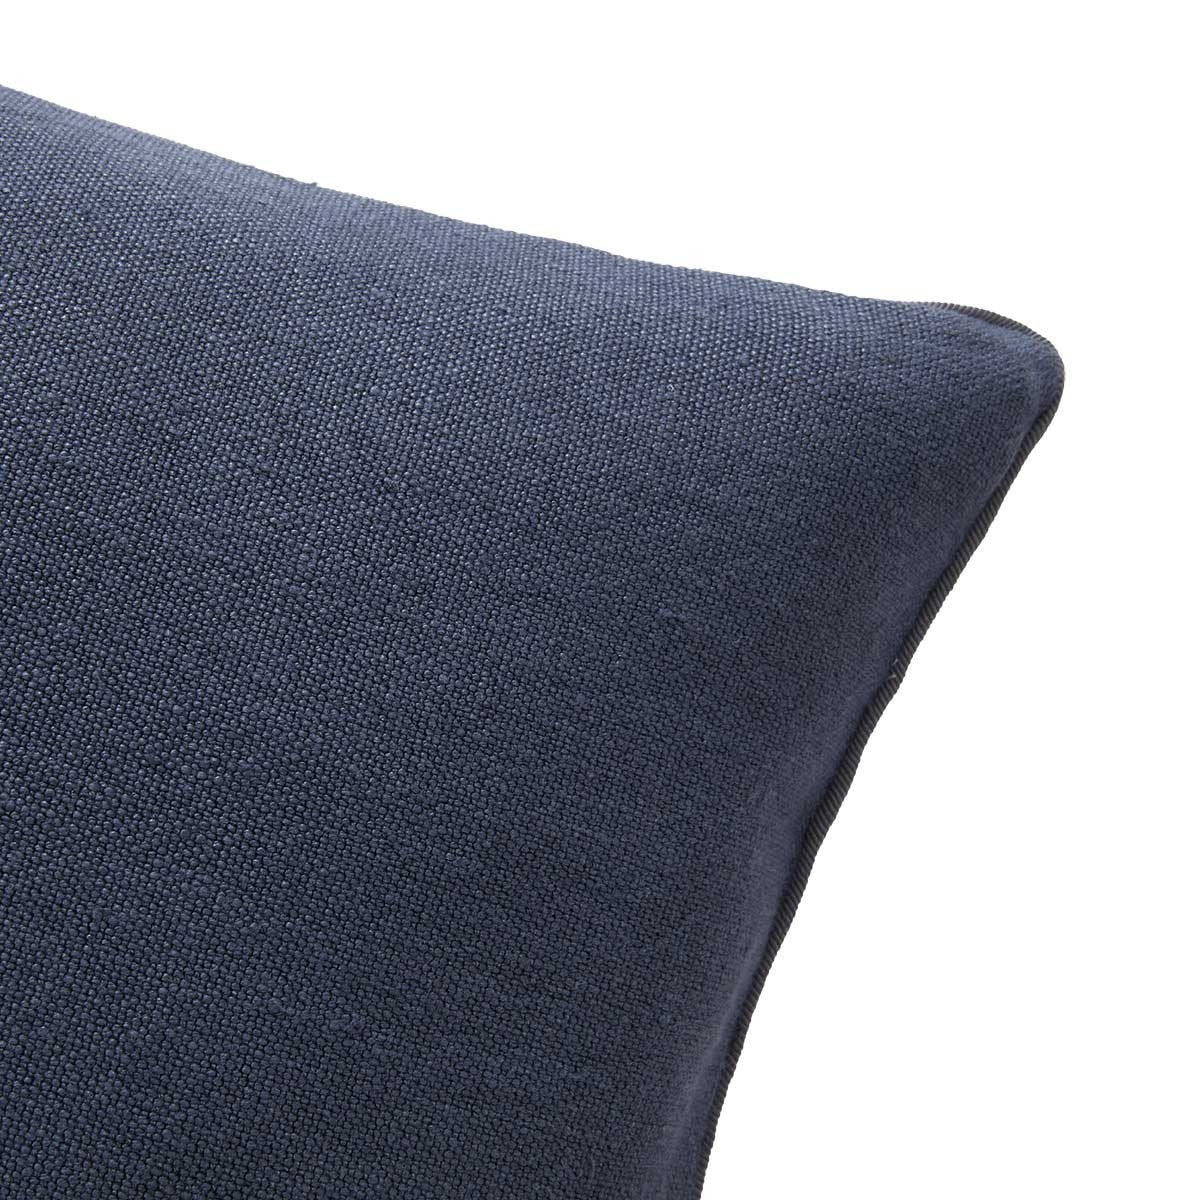 Pigment Nuit Square Decorative Pillow by Iosis | Fig Linens